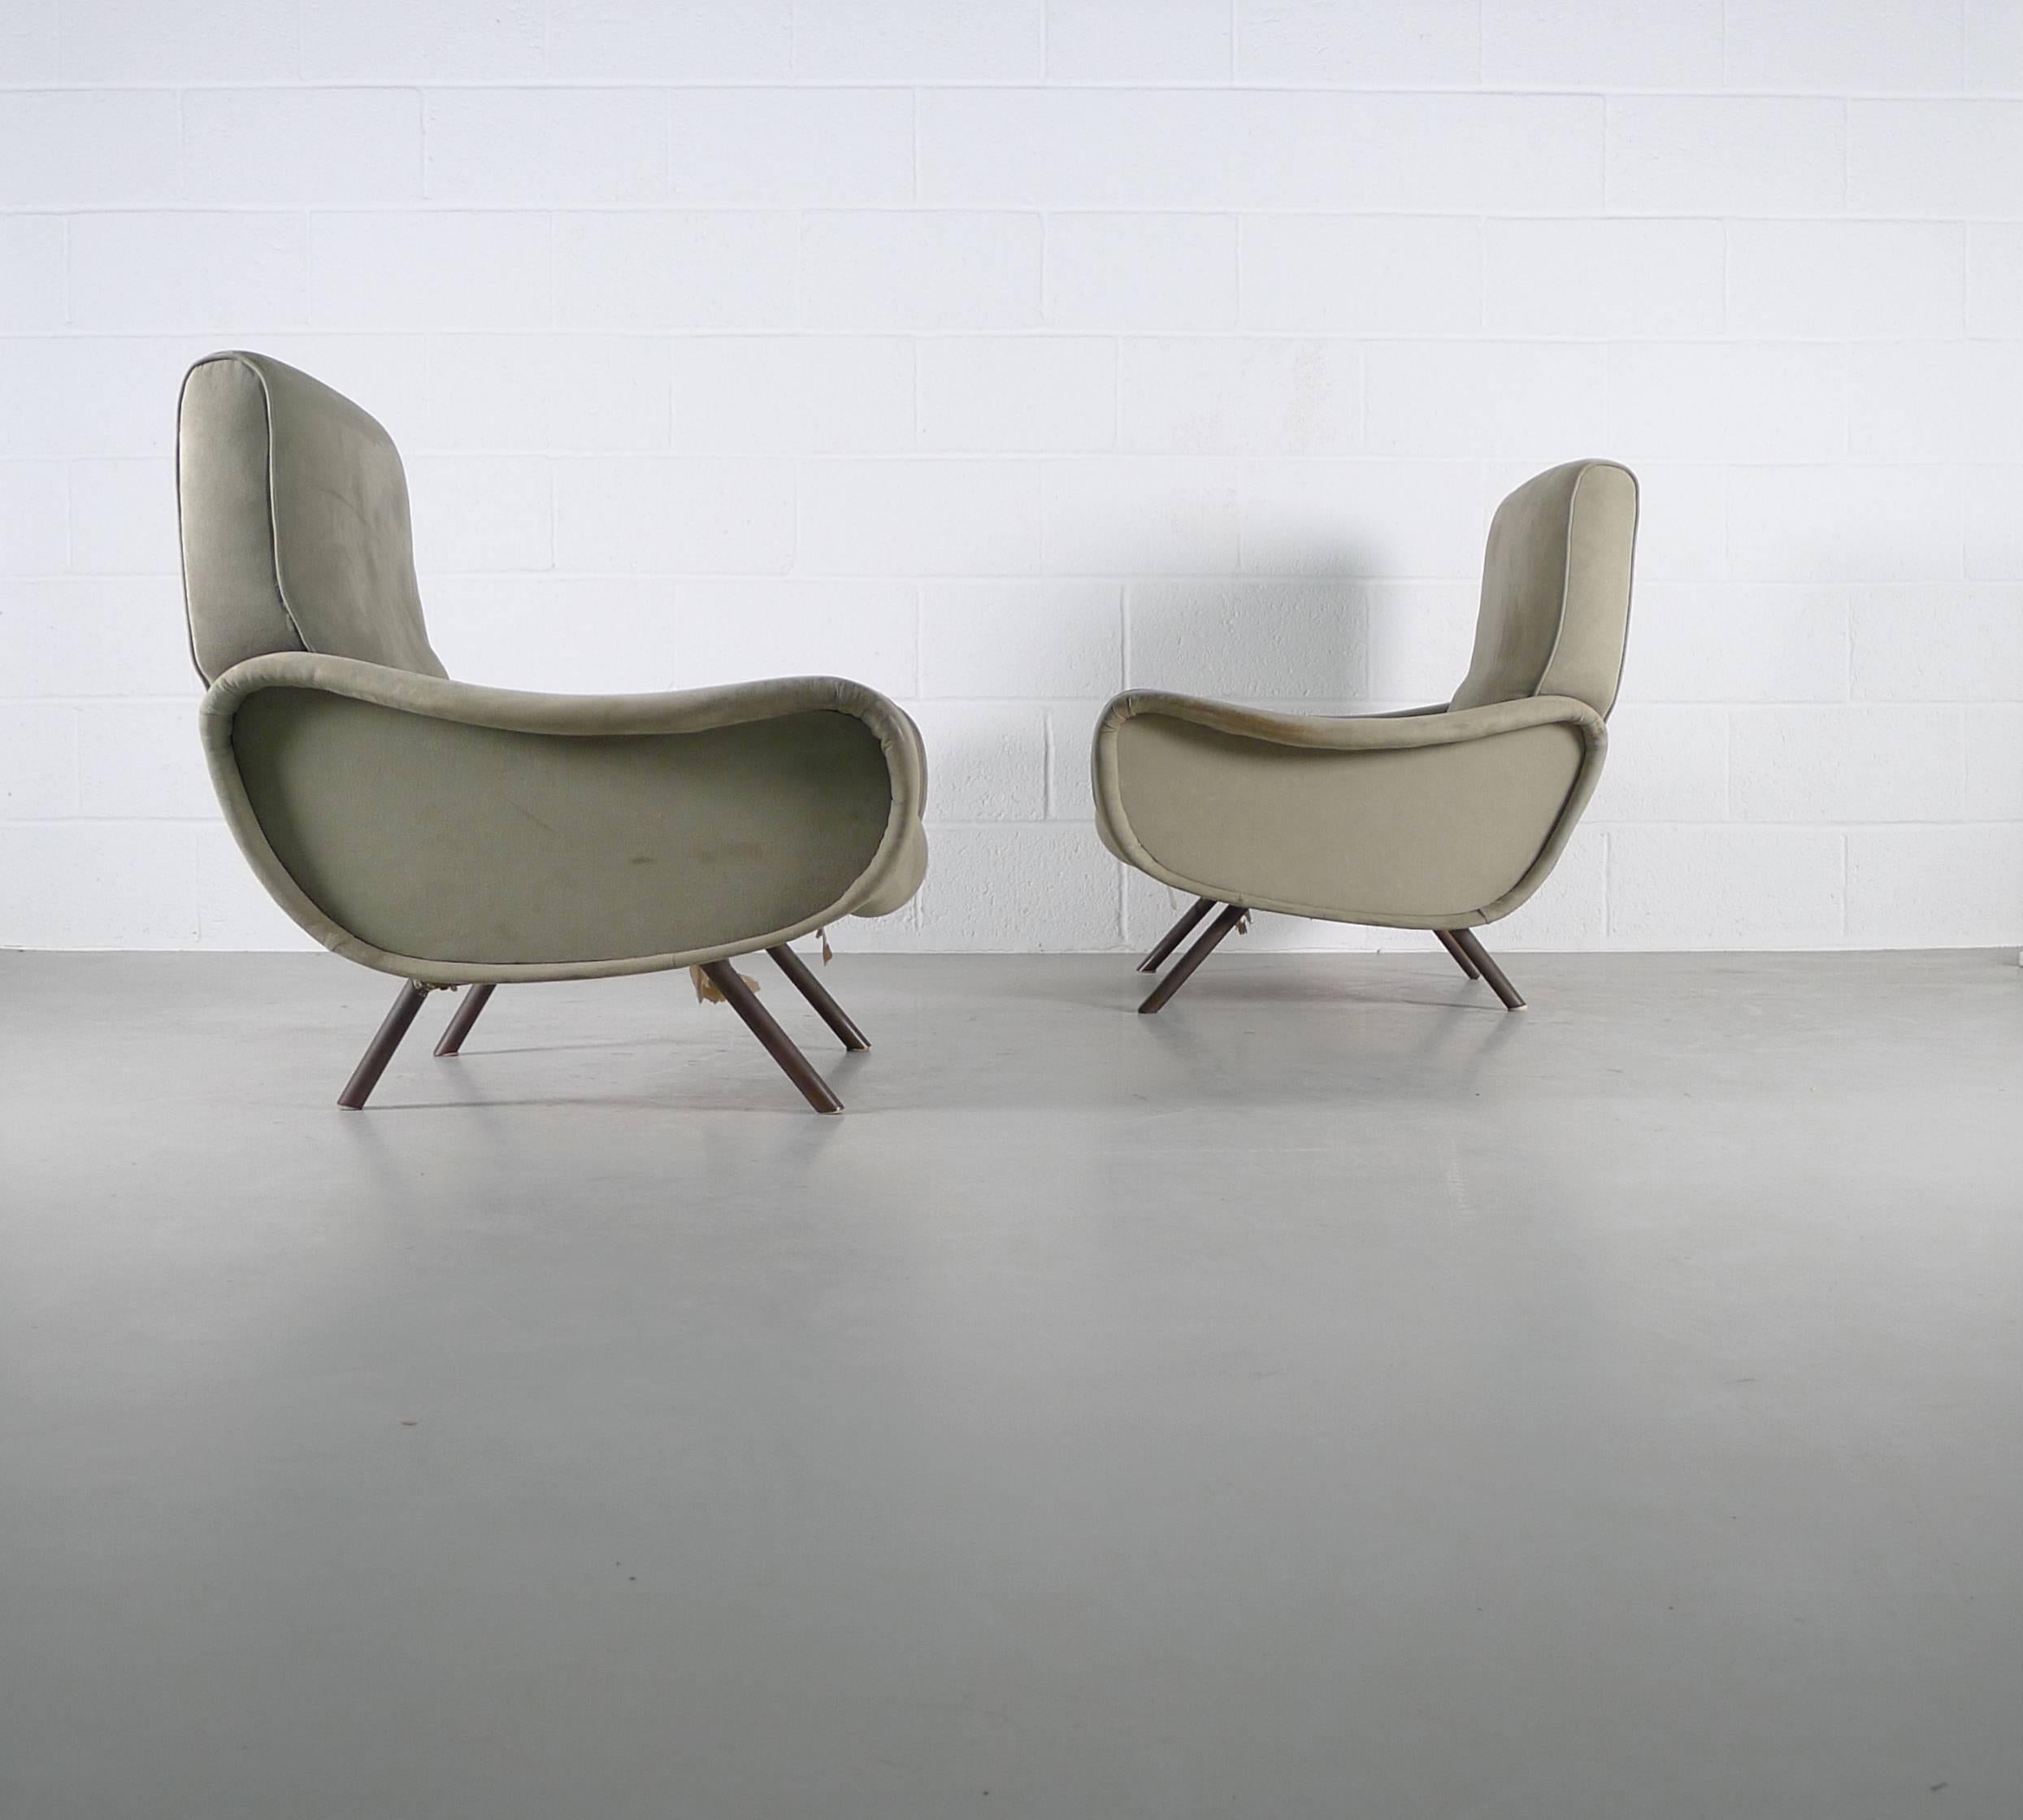 Marco Zanuso for Arflex, Italy, 1951. A pair of vintage Lady armchairs in their original coverings. These chairs will need re-upholstery to the new owners taste and decor as although the original covers are all in one piece there is a lot of